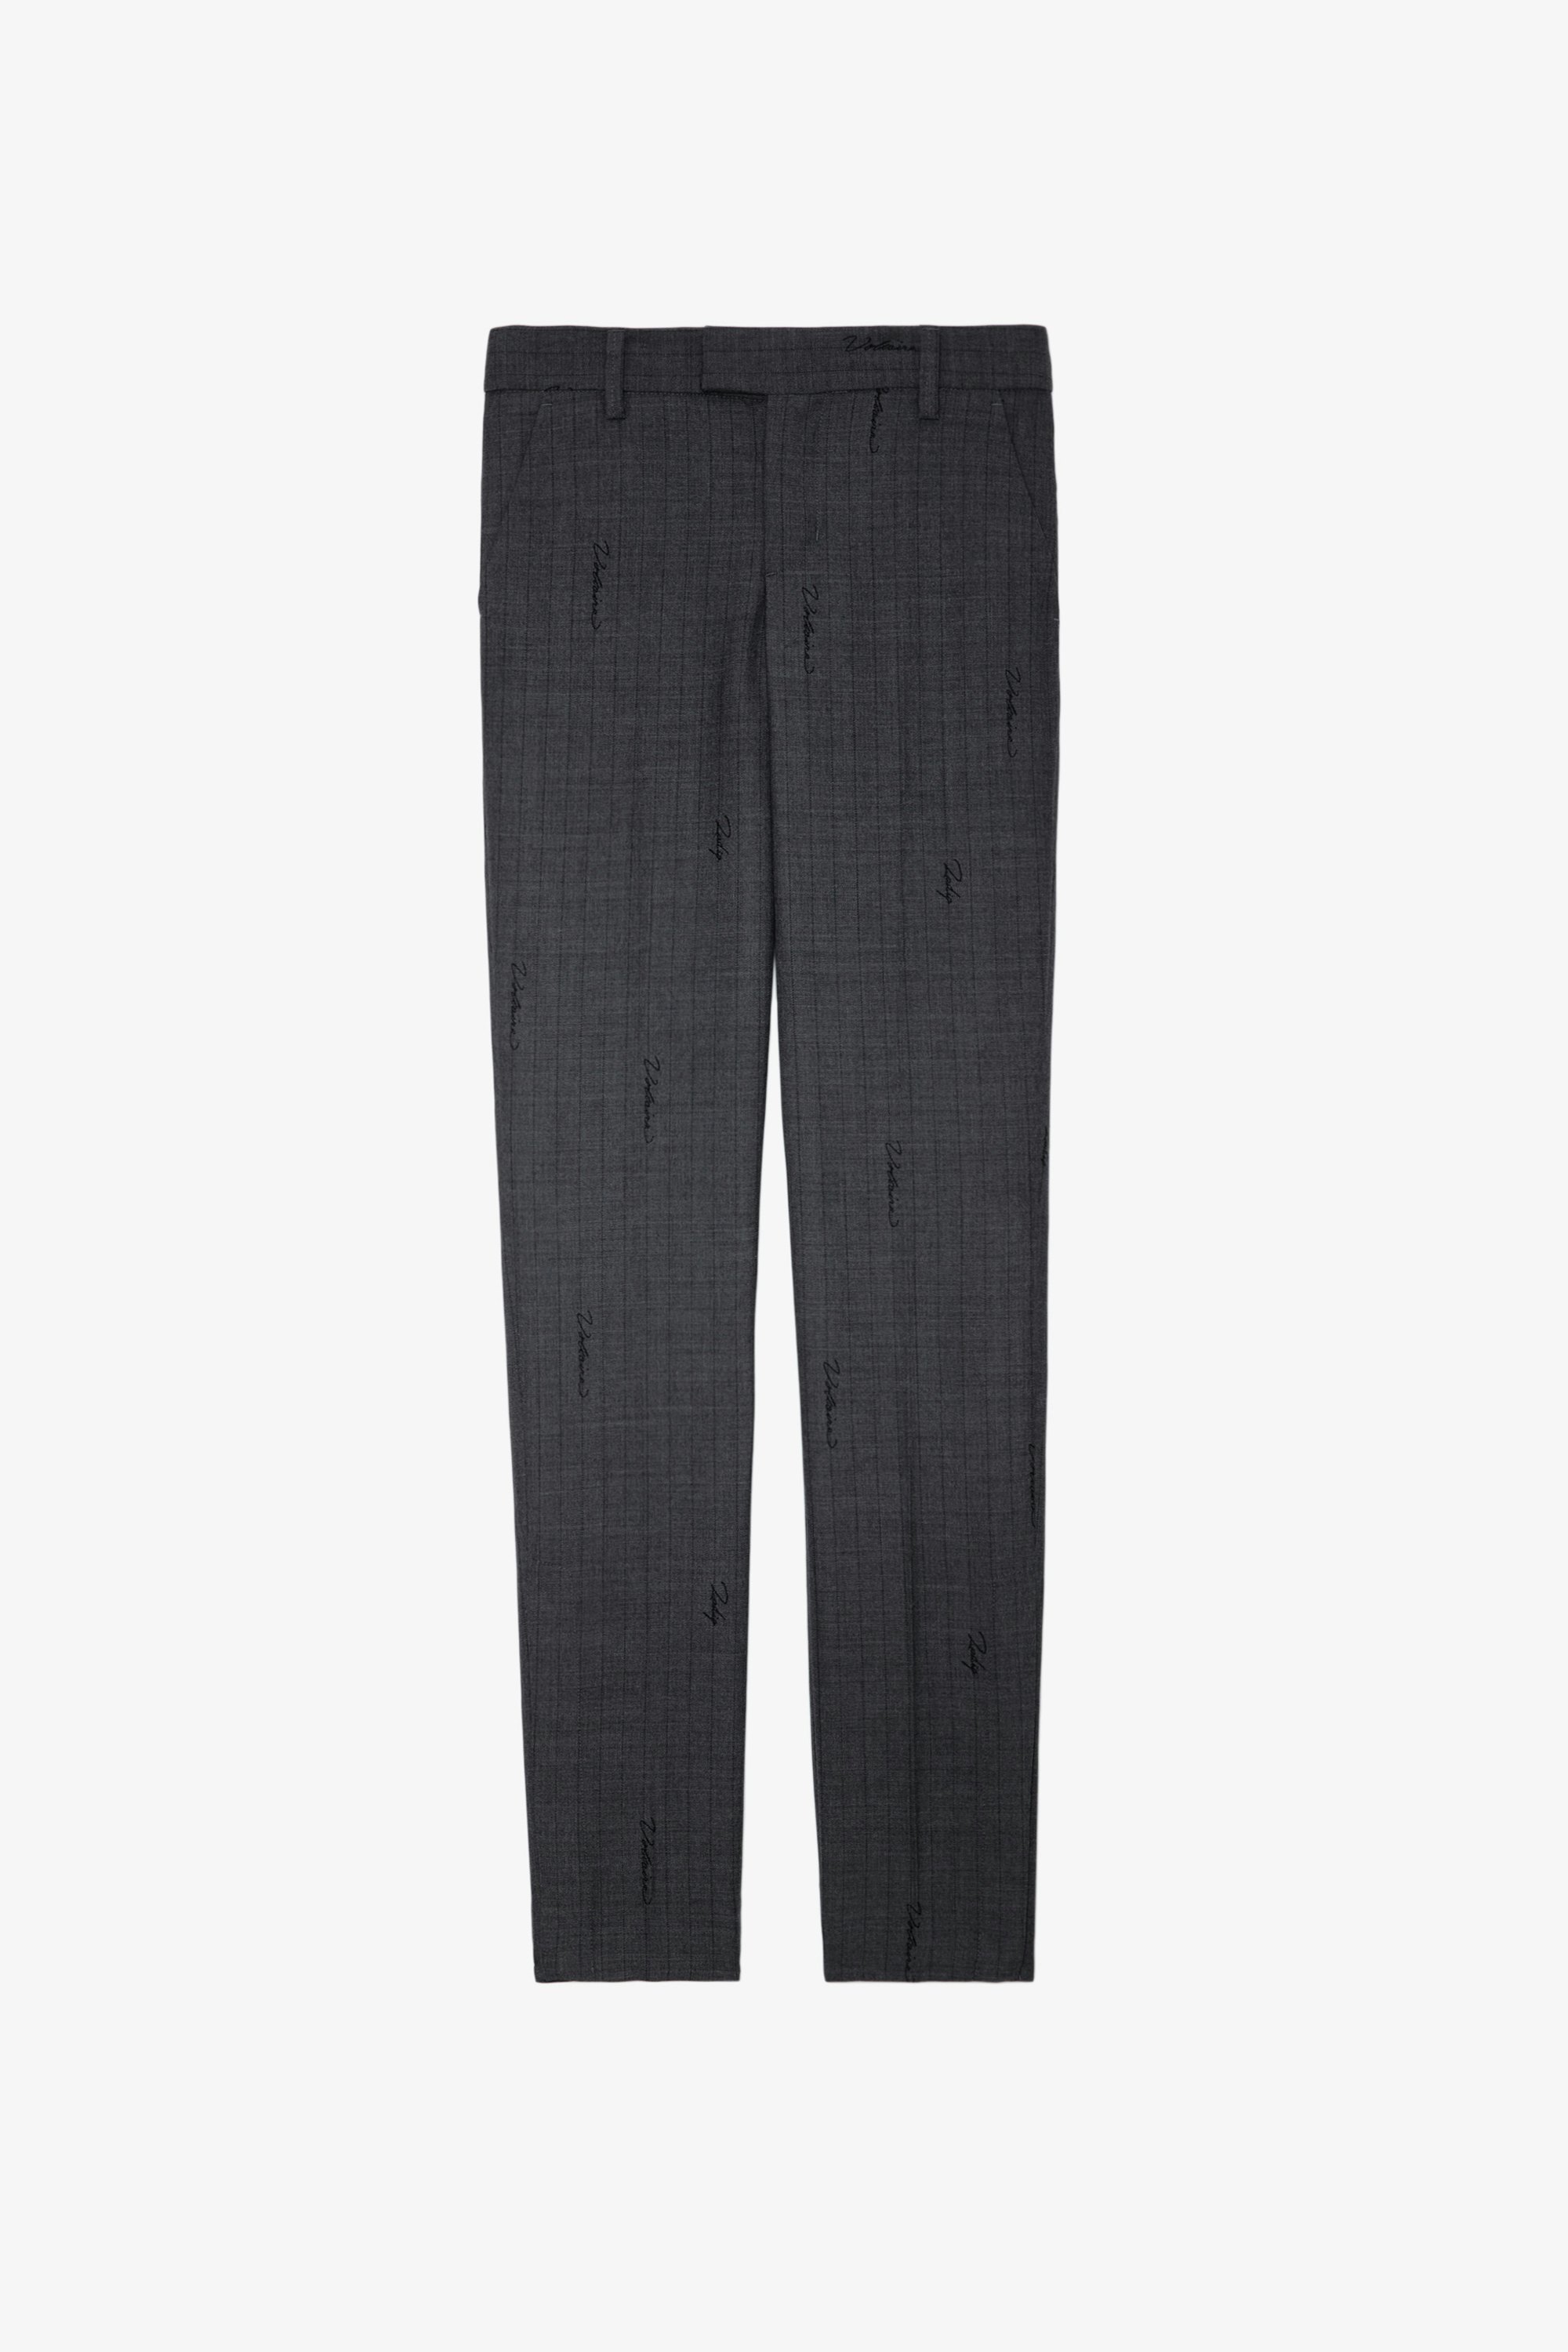 Prune Pants - Women’s anthracite tailored pants with stripes, monogram and zip hem.